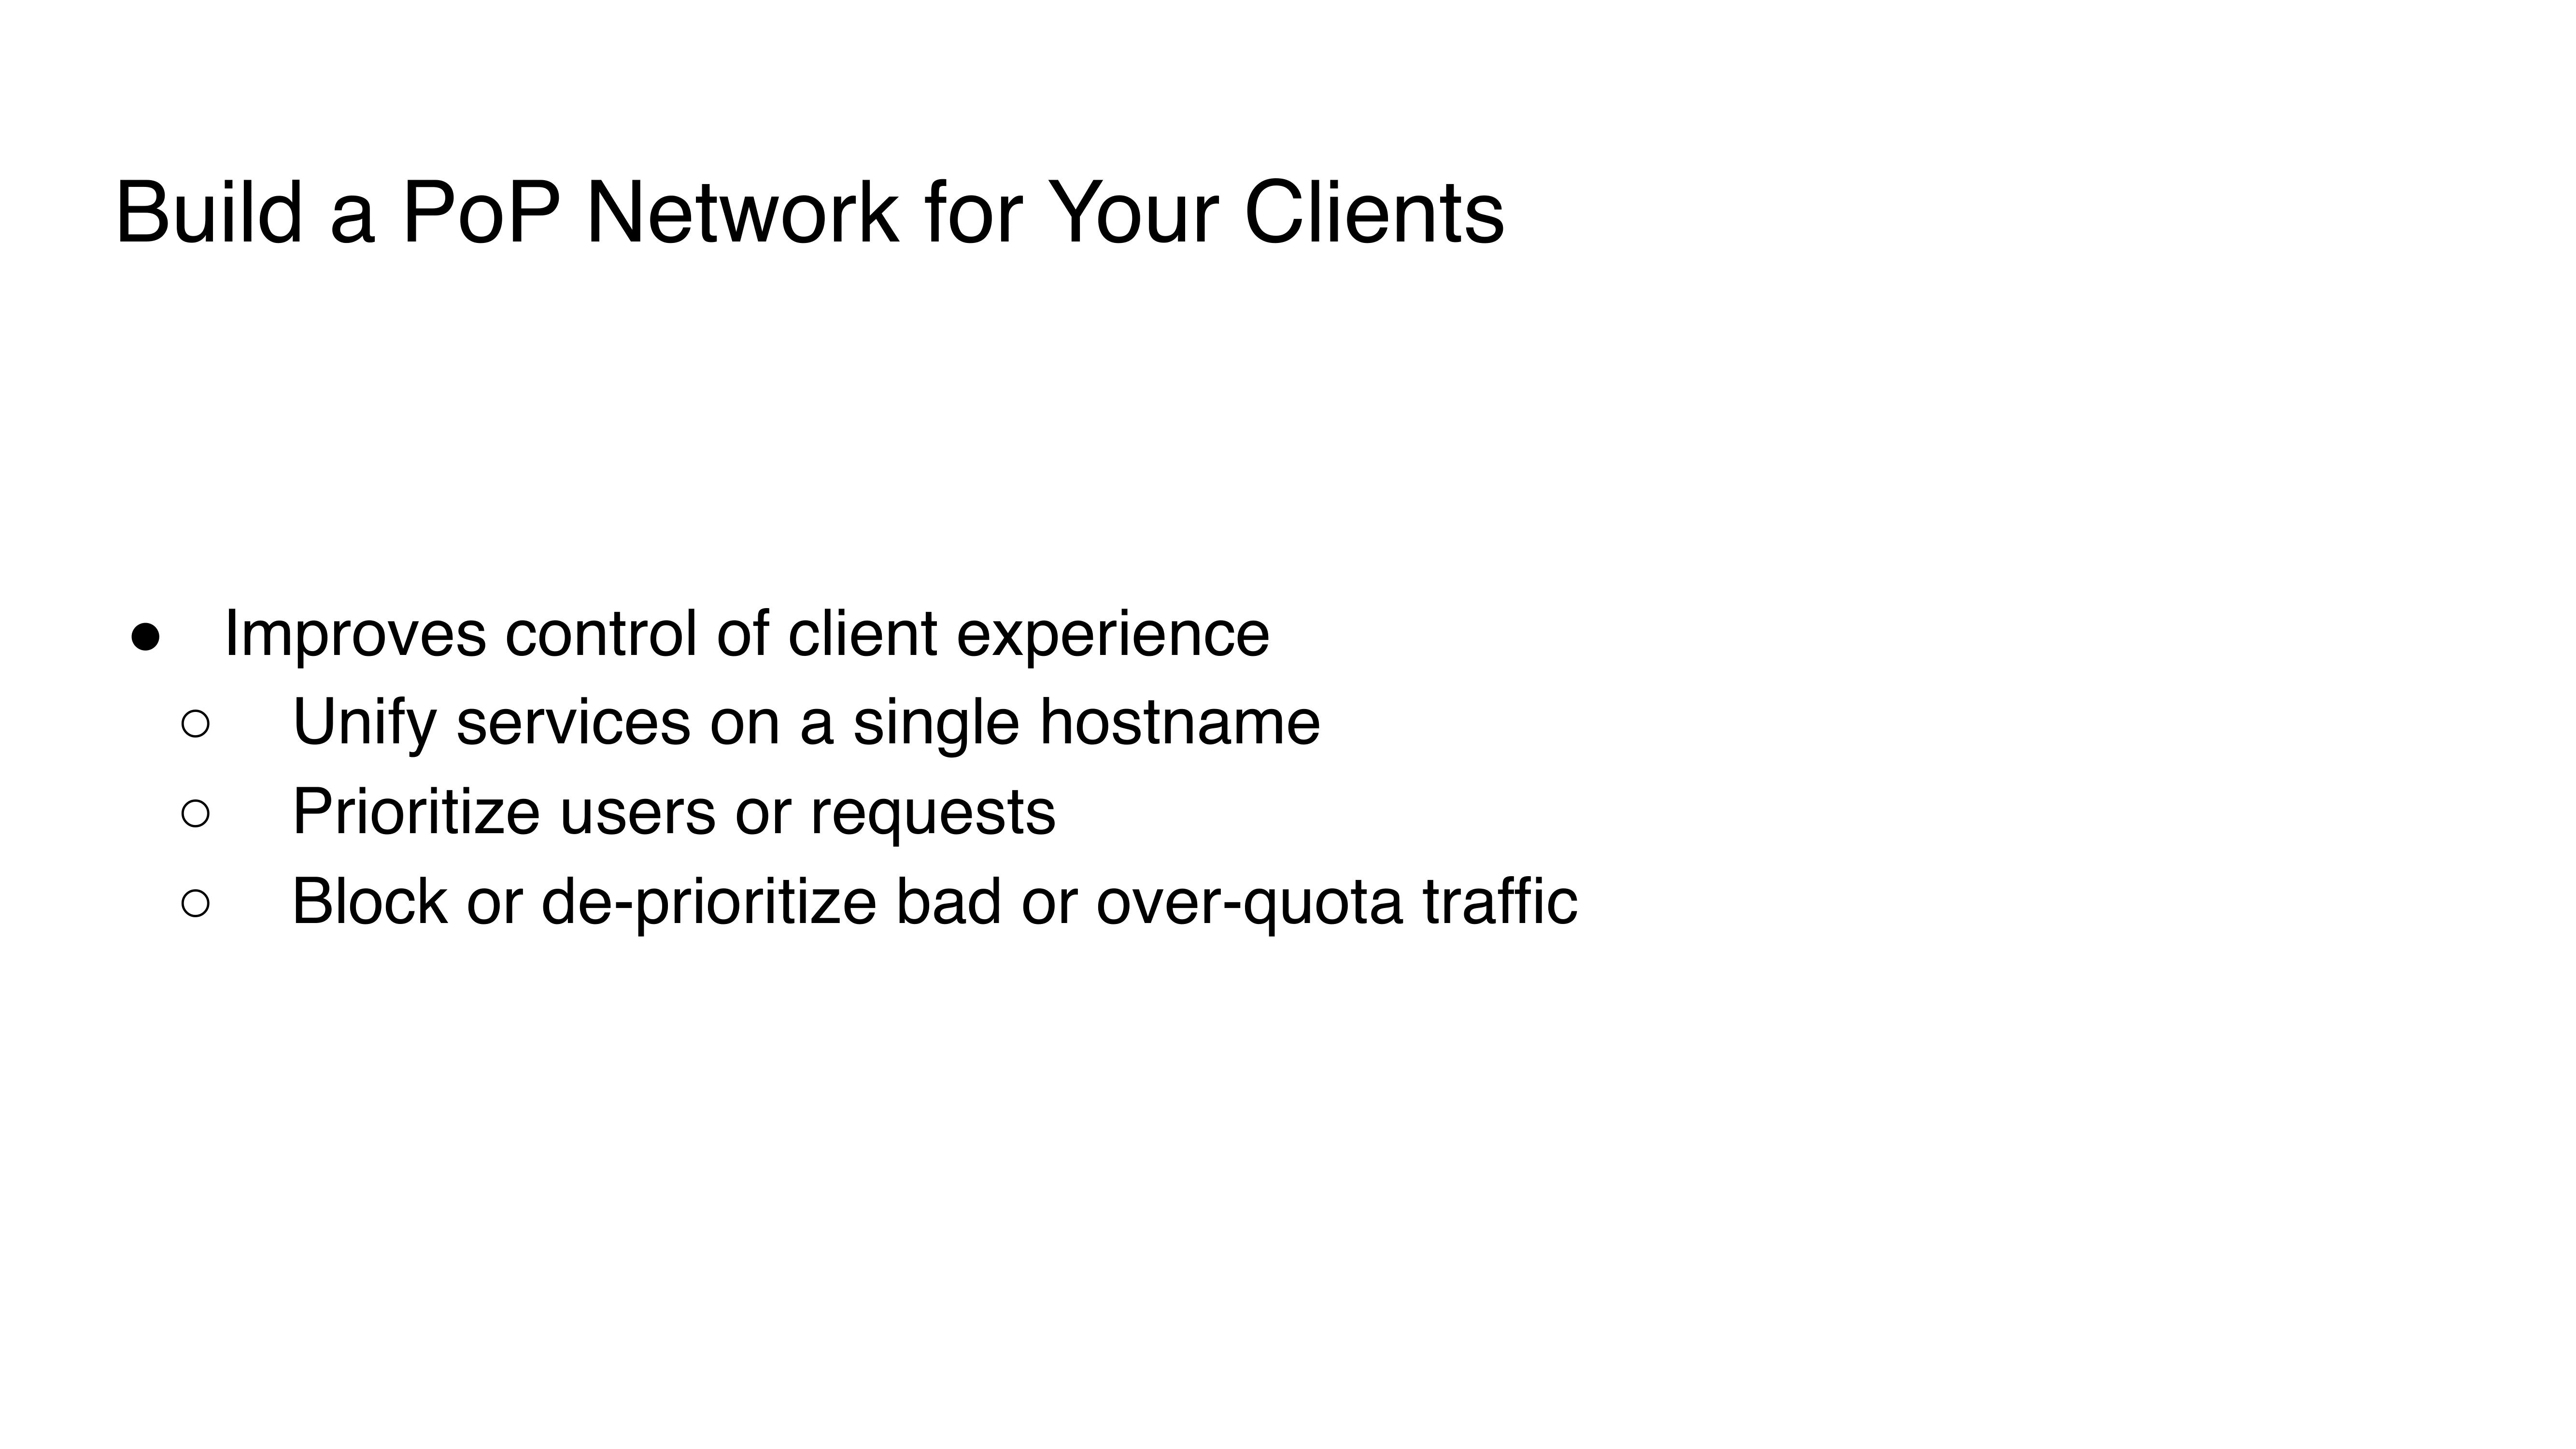 8.-build-a-pop-network-for-your-clients_improves-control-of-client-experience